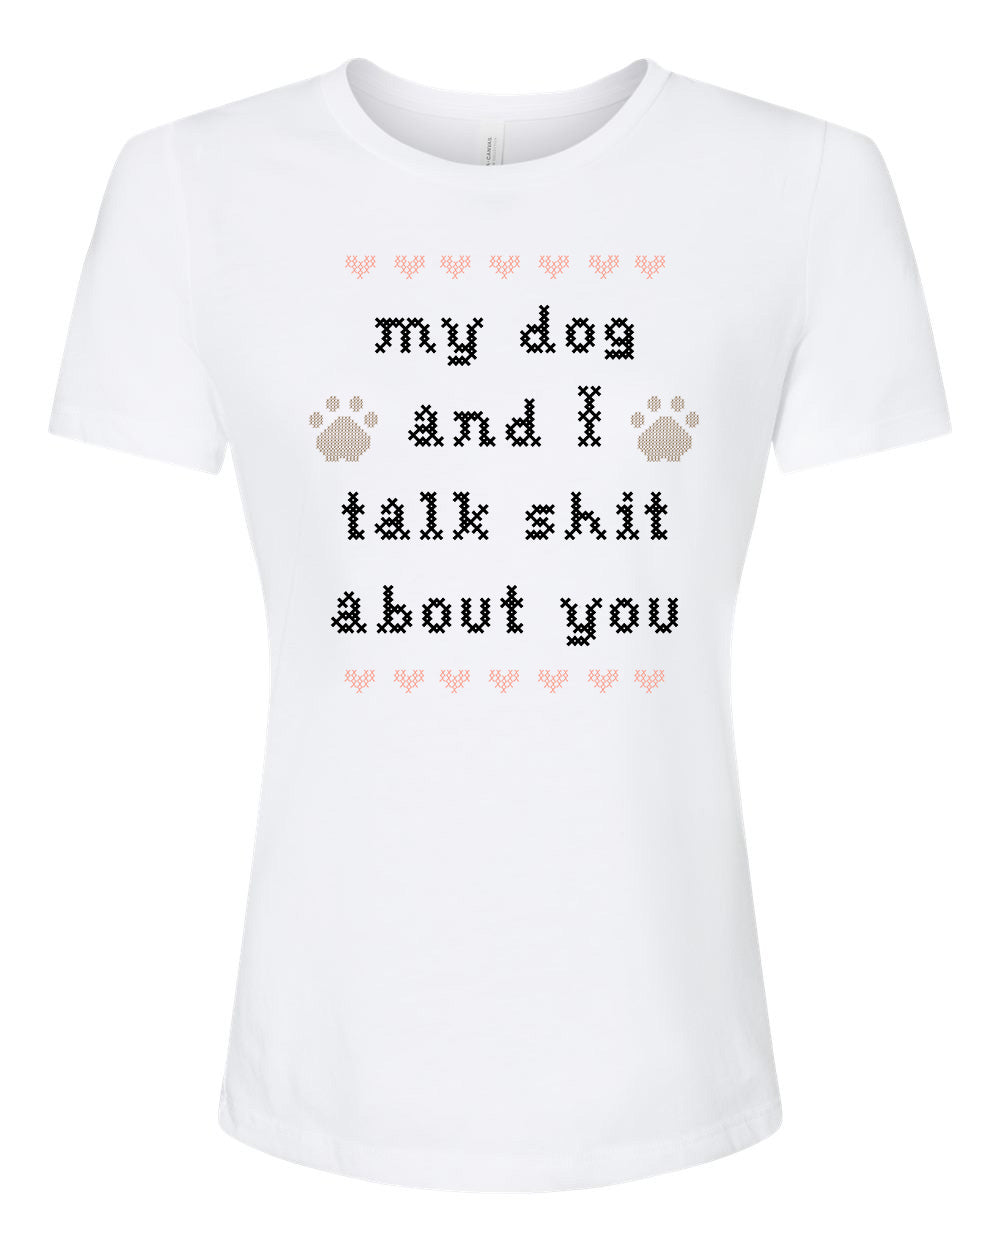 My Dog And I Talk Shit About You - Cross Stitch Design - Women's Crew Tee - White